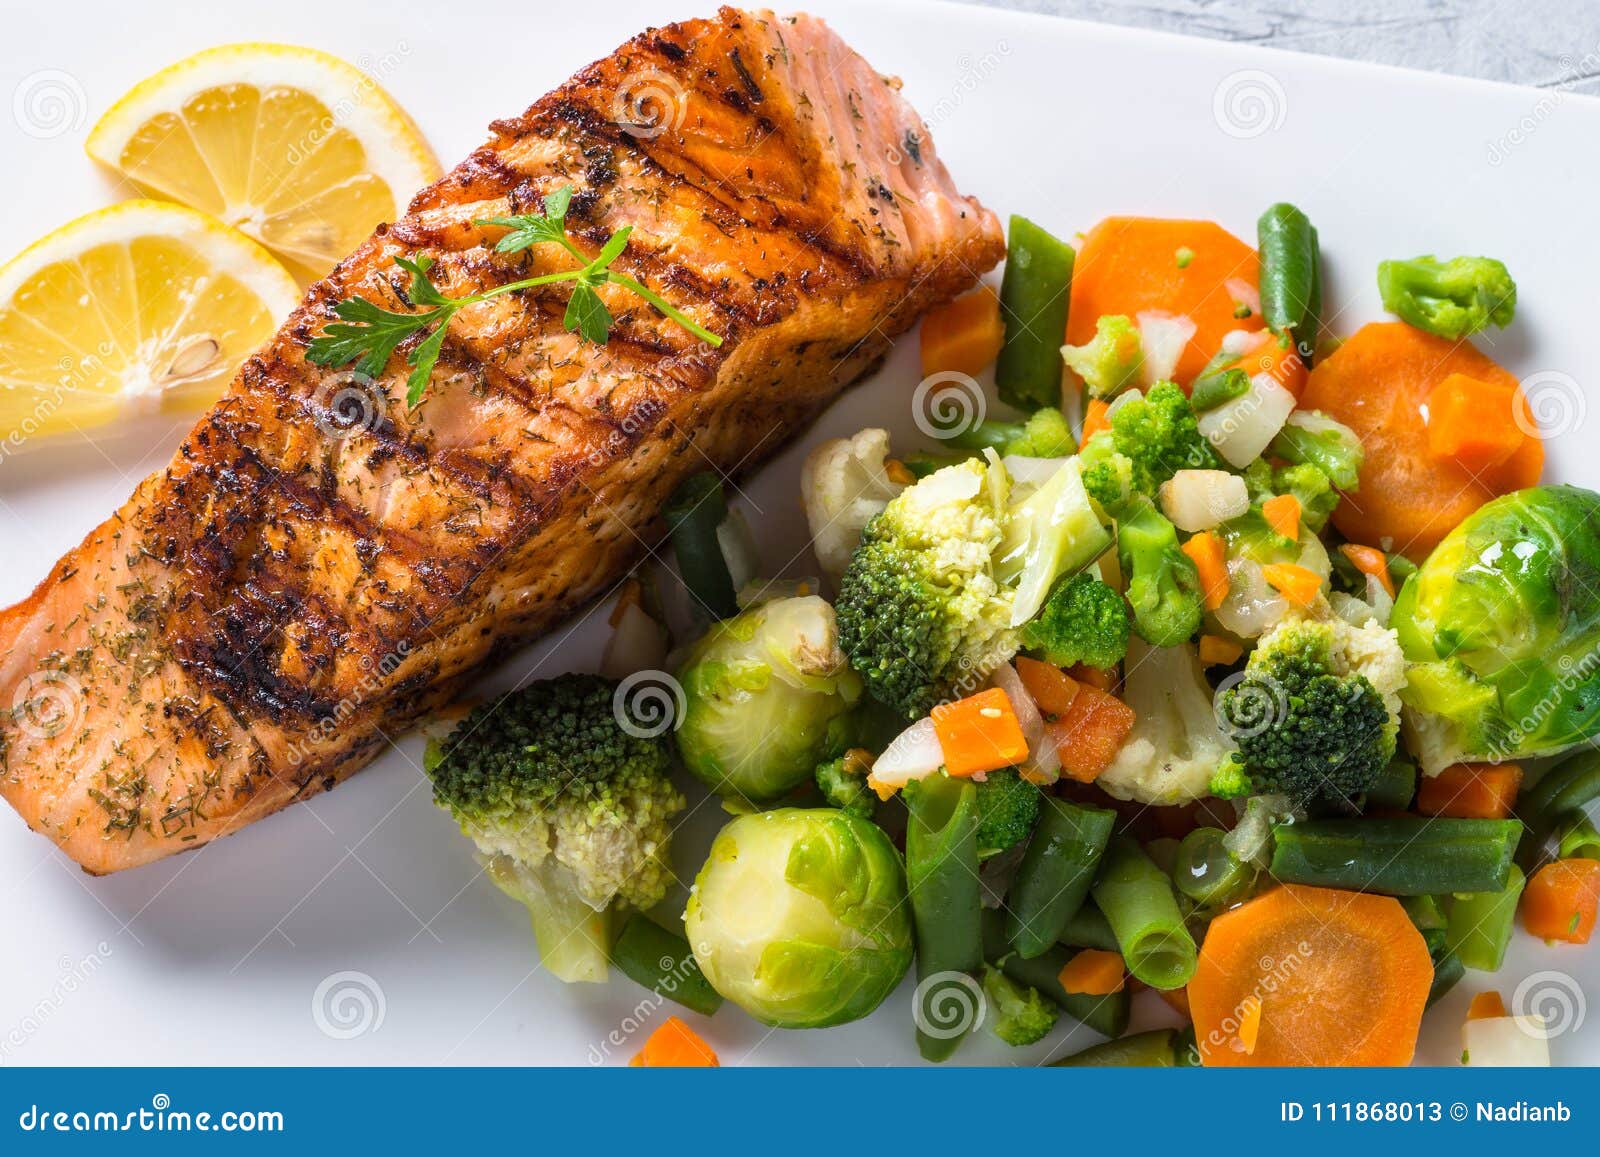 Grilled Salmon Fillet with Vegetables Mix. Stock Image - Image of ...